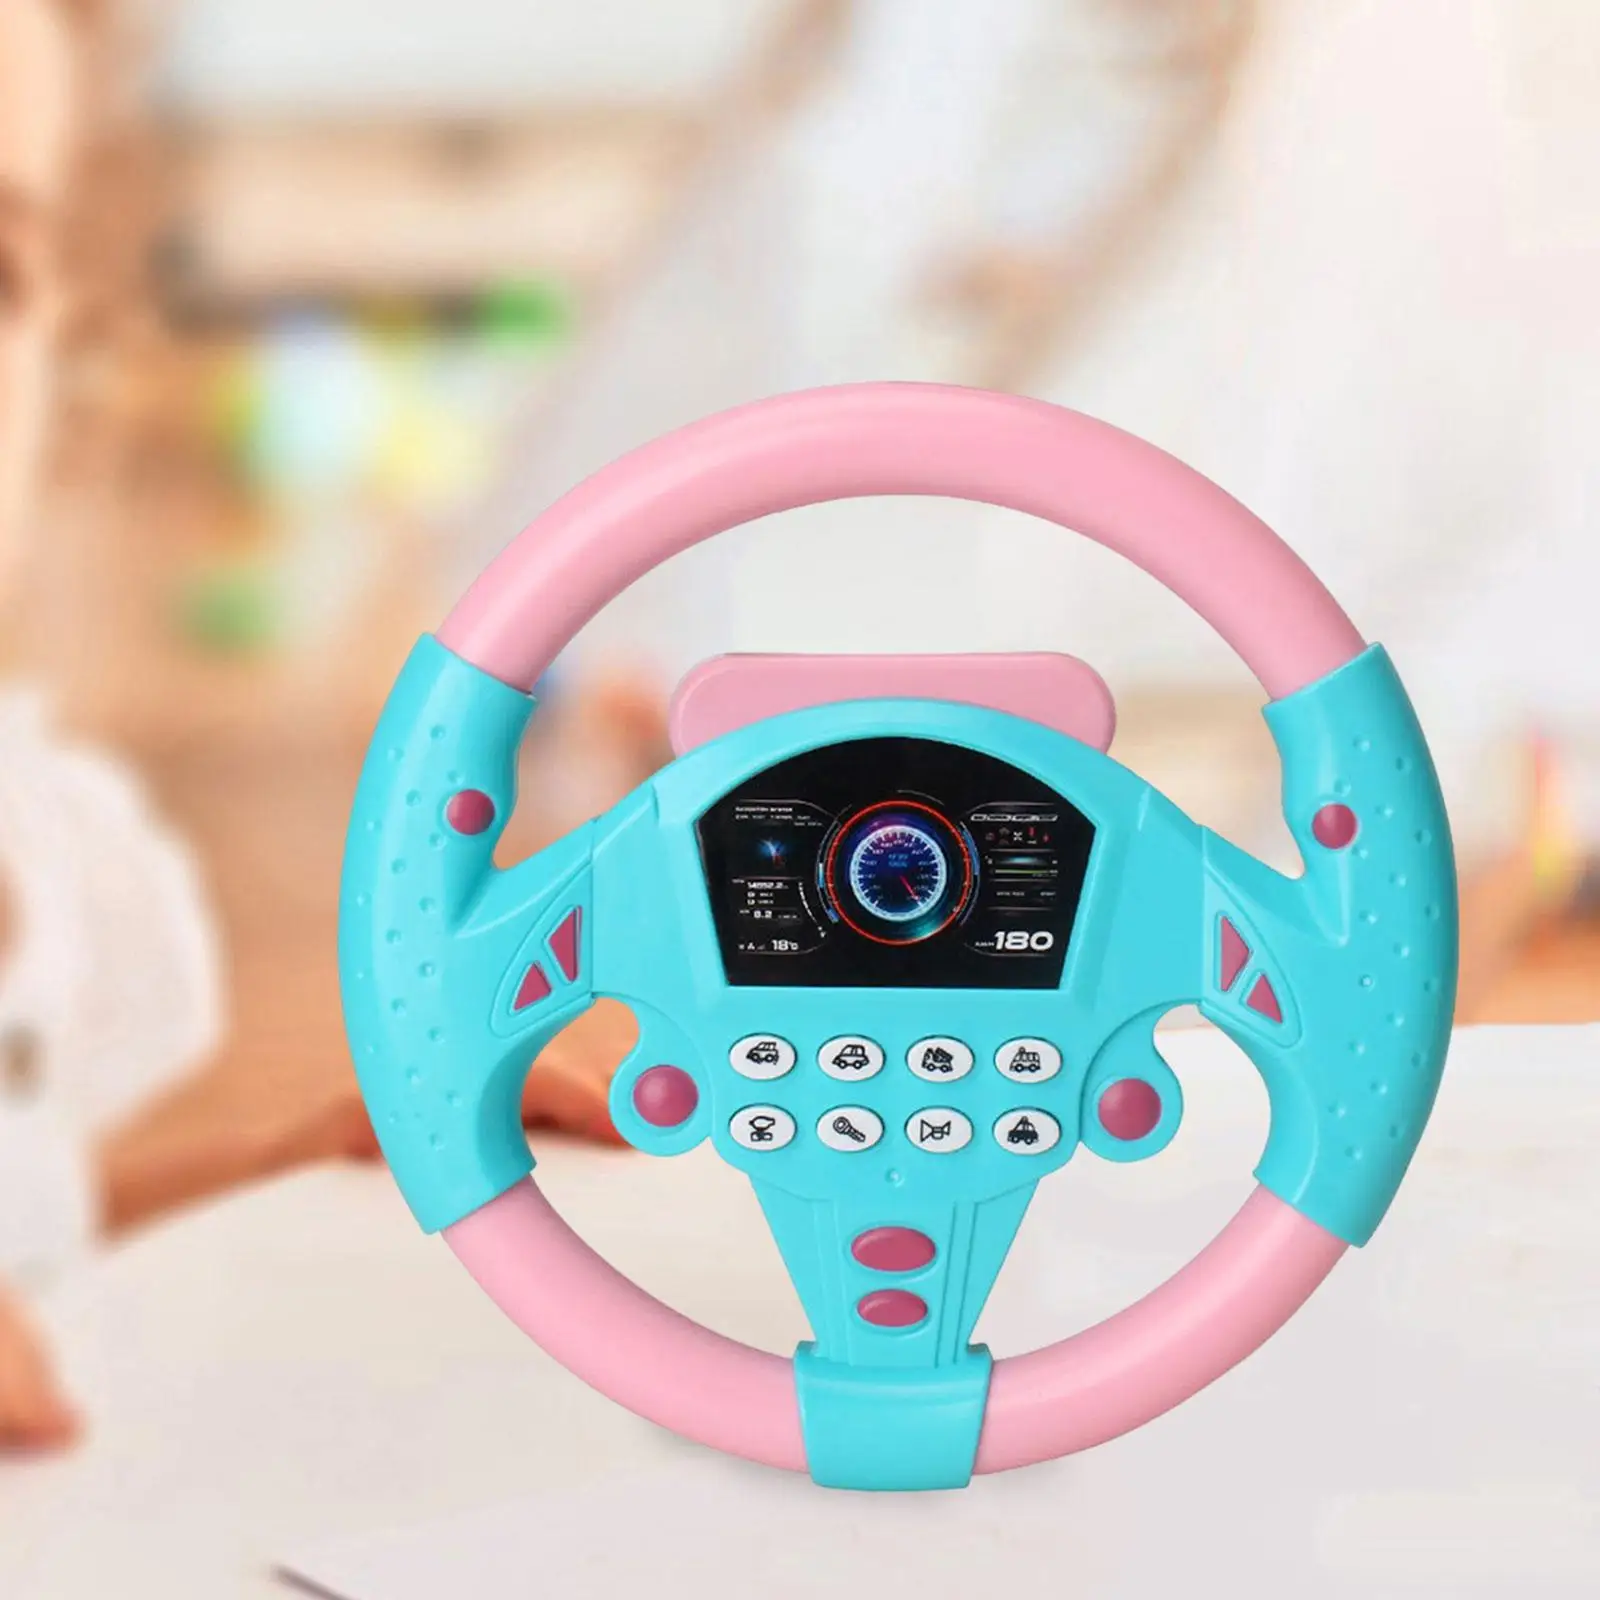 Simulation Steering Wheel Toy Interactive Driving Wheel Interactive Toys Musical